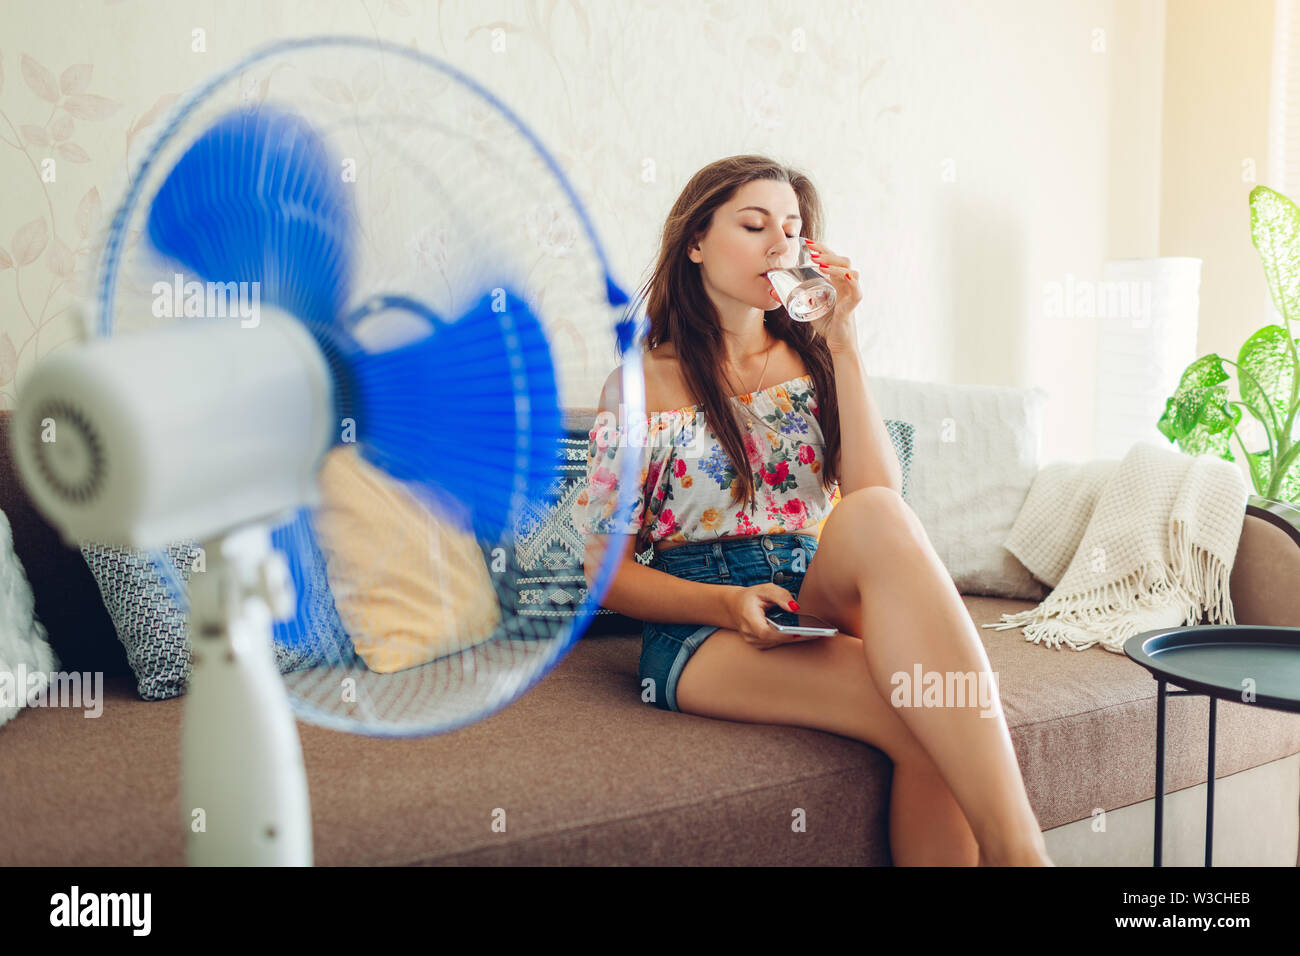 6,240 Beautiful Woman Cooling Fan Royalty-Free Images, Stock